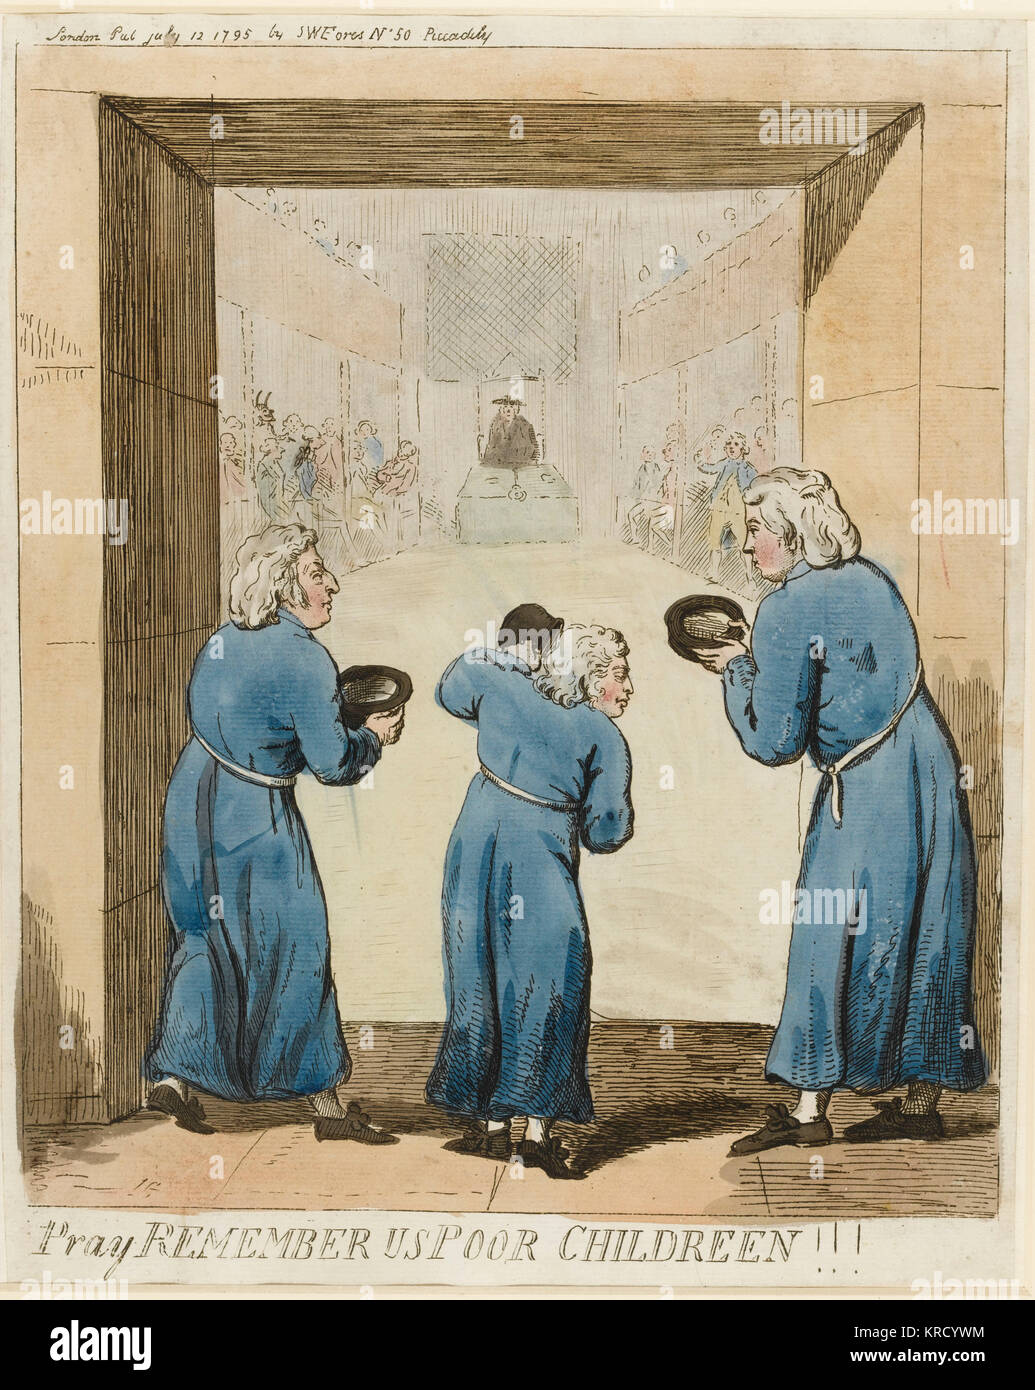 Satirical cartoon, Pray remember us poor Childreen!!! Standing at the entrance to Parliament, a debate in progress, the Duke of York, Duke of Clarence and the Prince of Wales, the King's sons, depicted as poor charity children wearing long blue coats with yellow stockings, hold out begging bowls.  In the background the Speaker (Addington) is prominent.  Debates discussing the Prince's debts were held on 27 April and 14 May 1795.  The Dukes of York and Clarence were also much in debt.     Date: 1795 Stock Photo